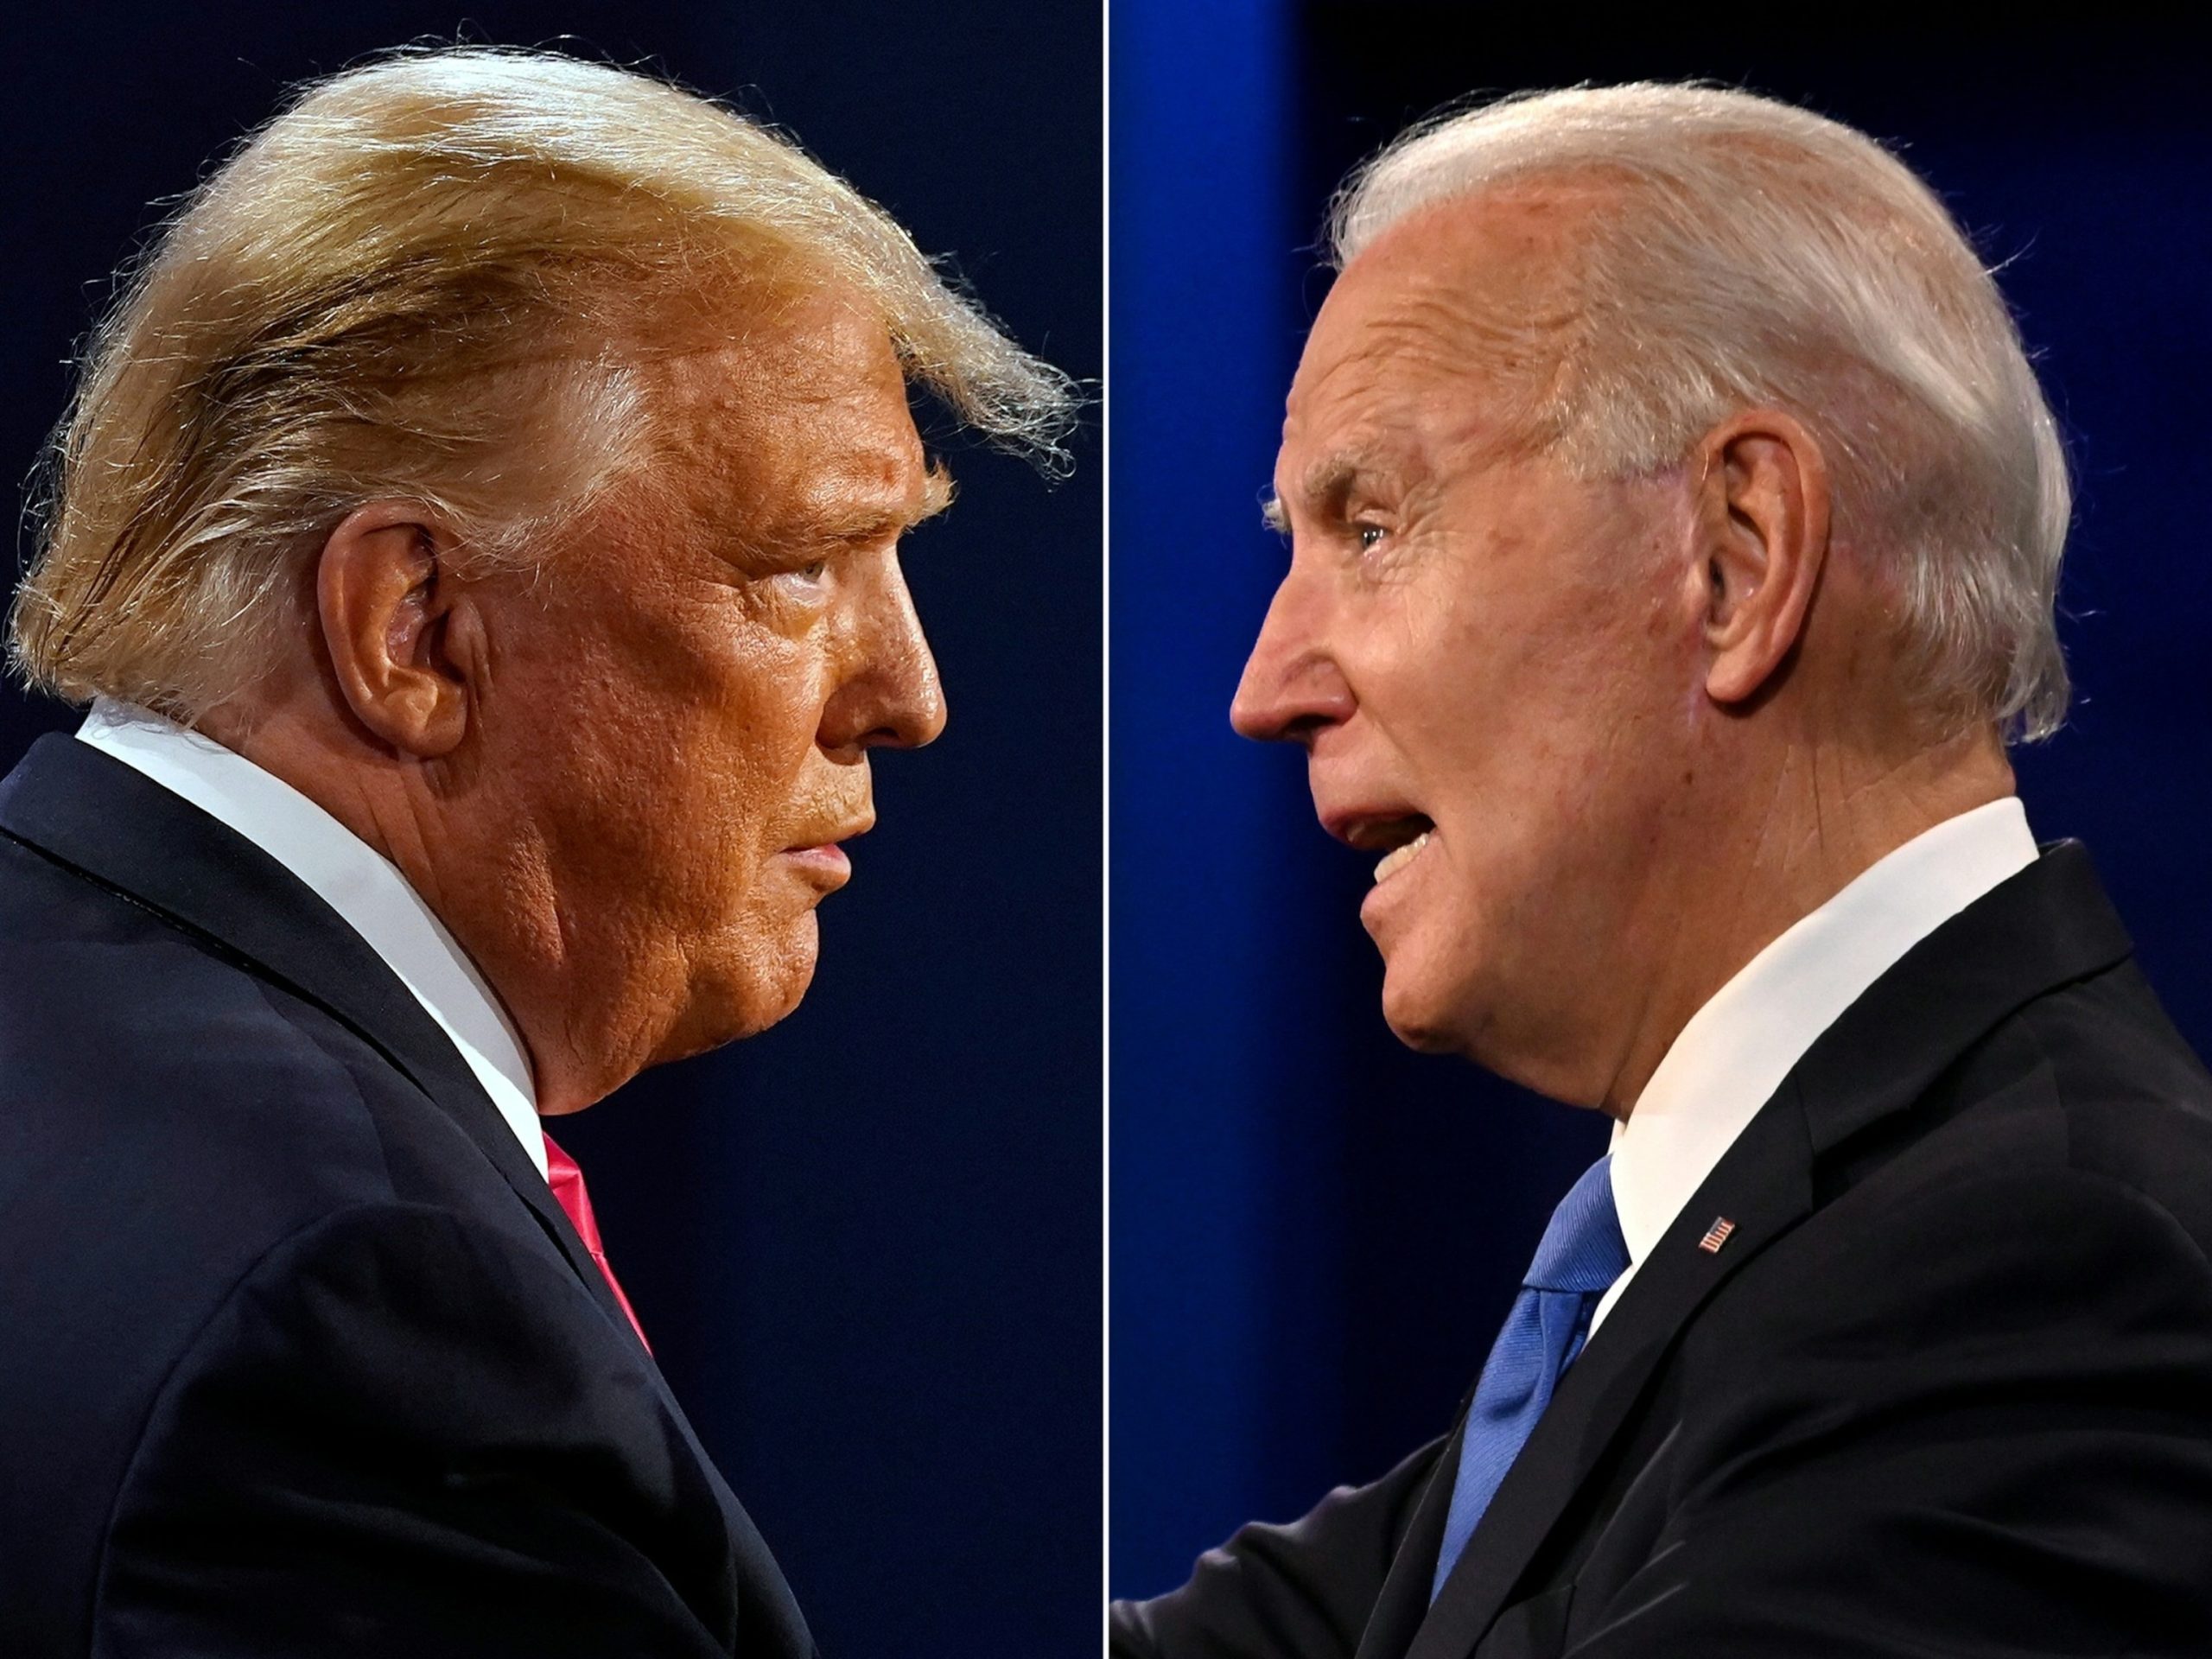 The upcoming Biden-Trump presidential debate is scheduled for September on ABC.